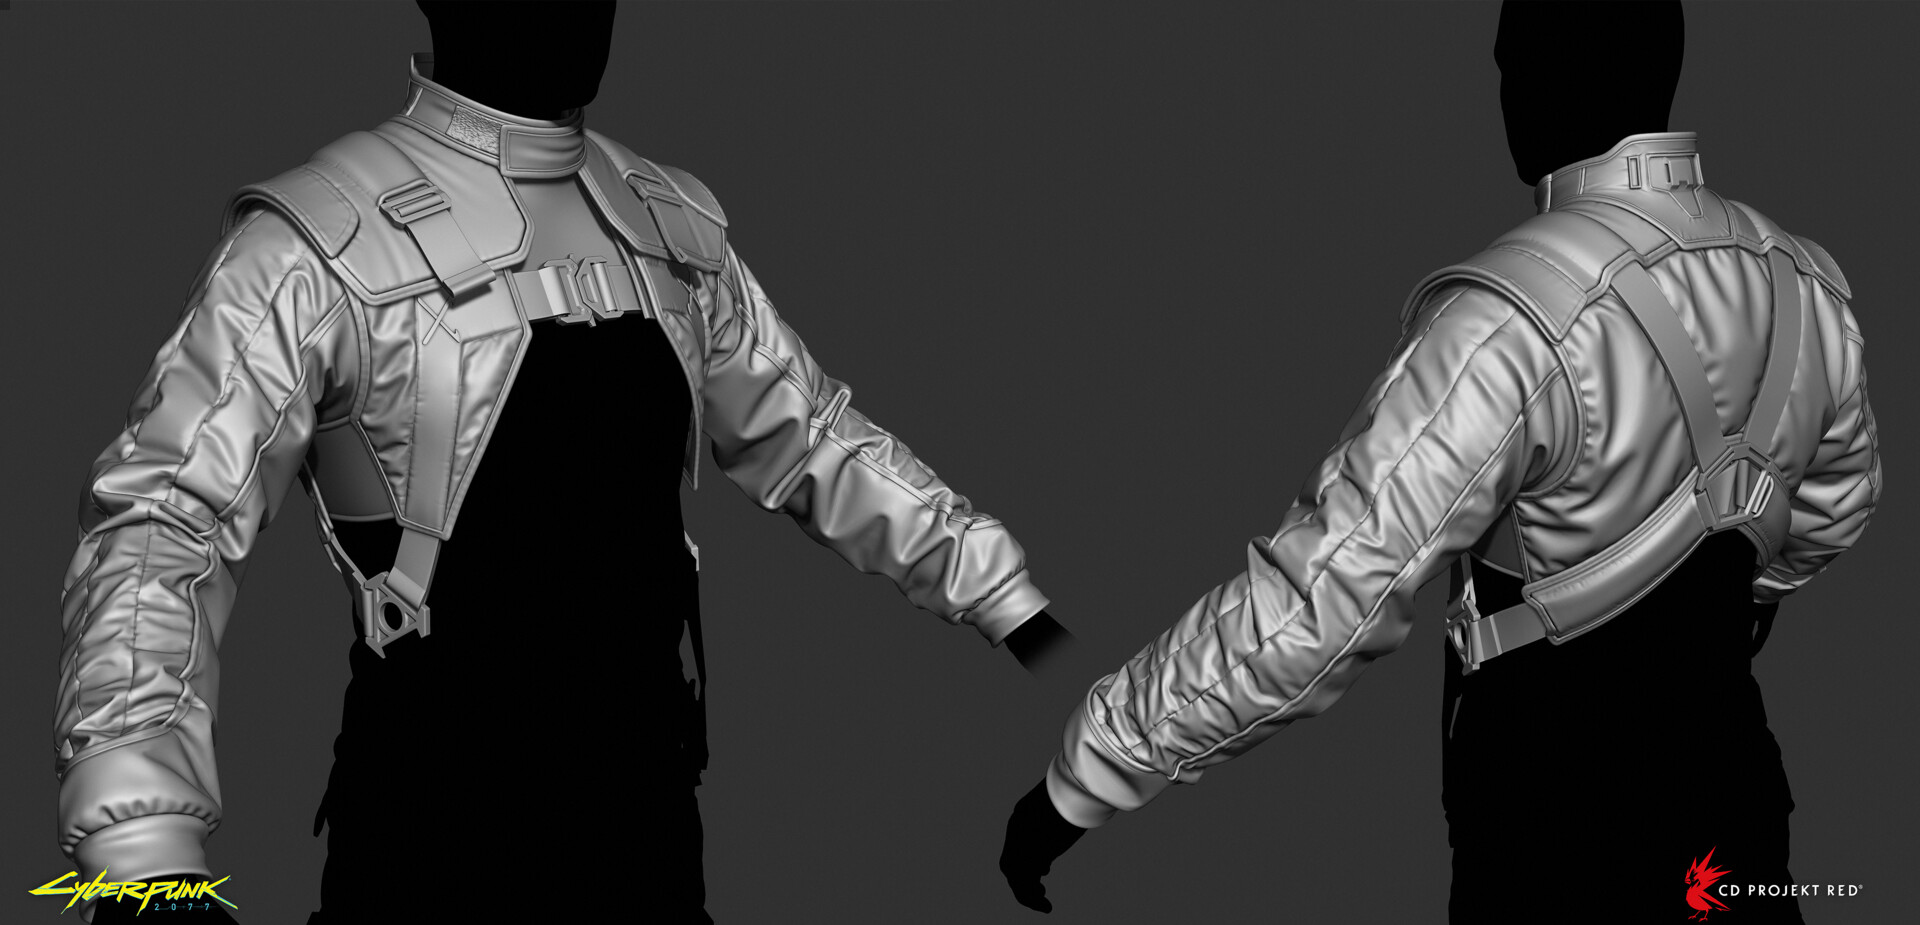 Aldecaldos racing jacket and pants which I created for Cyberpunk 2077. 